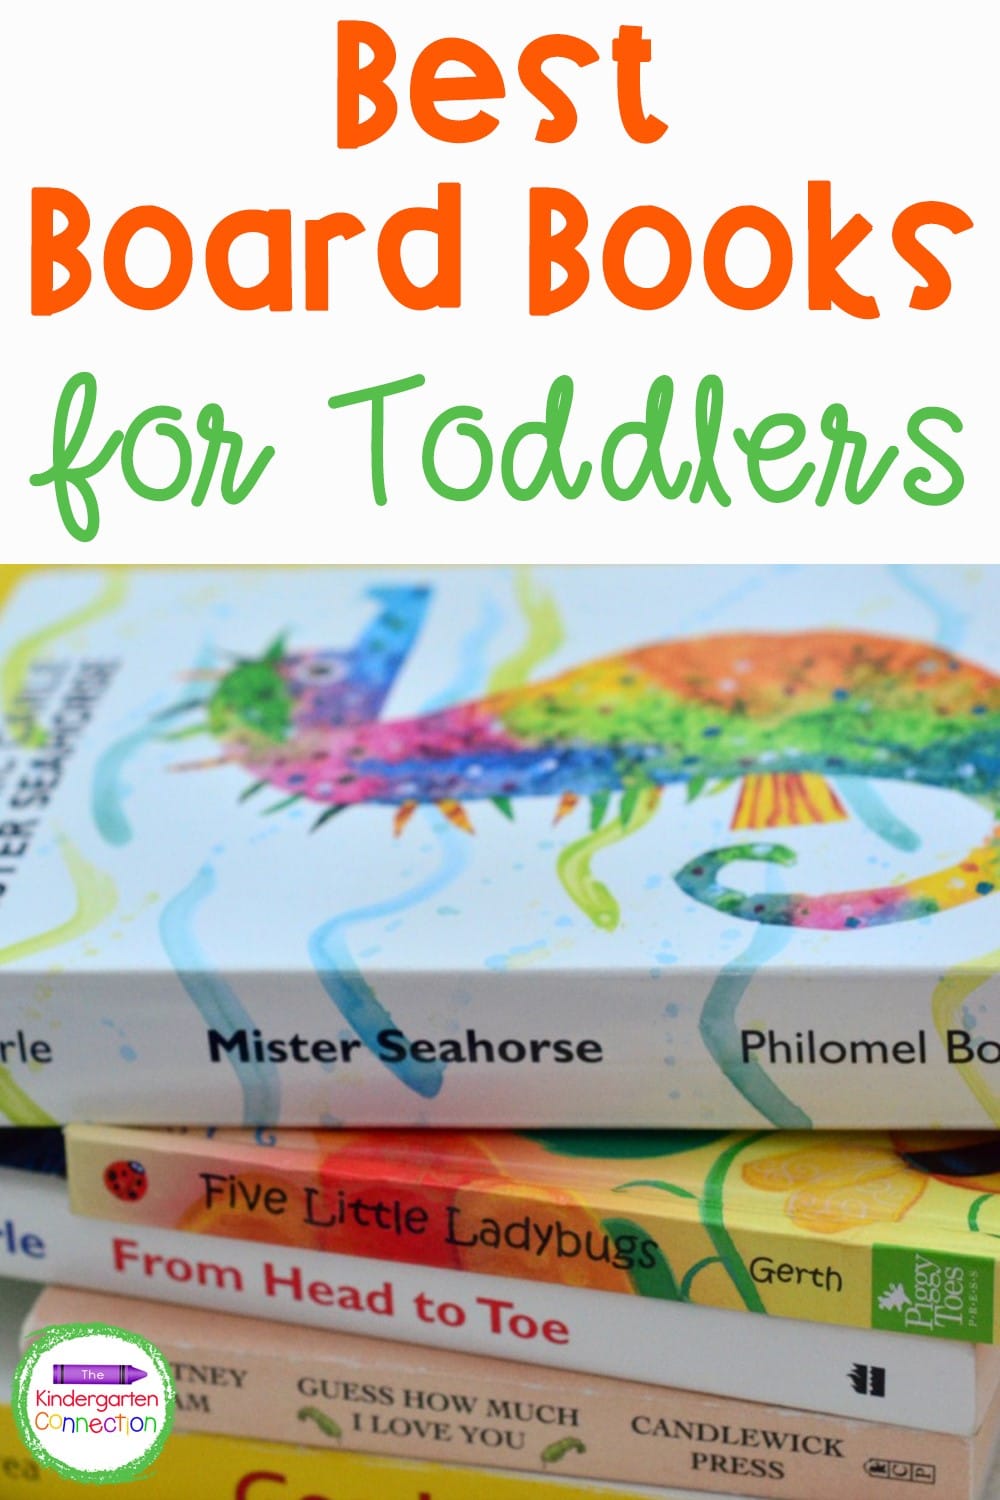 Use these board books for toddlers to lay a firm reading foundation. They are some of the most loved and popular books around!